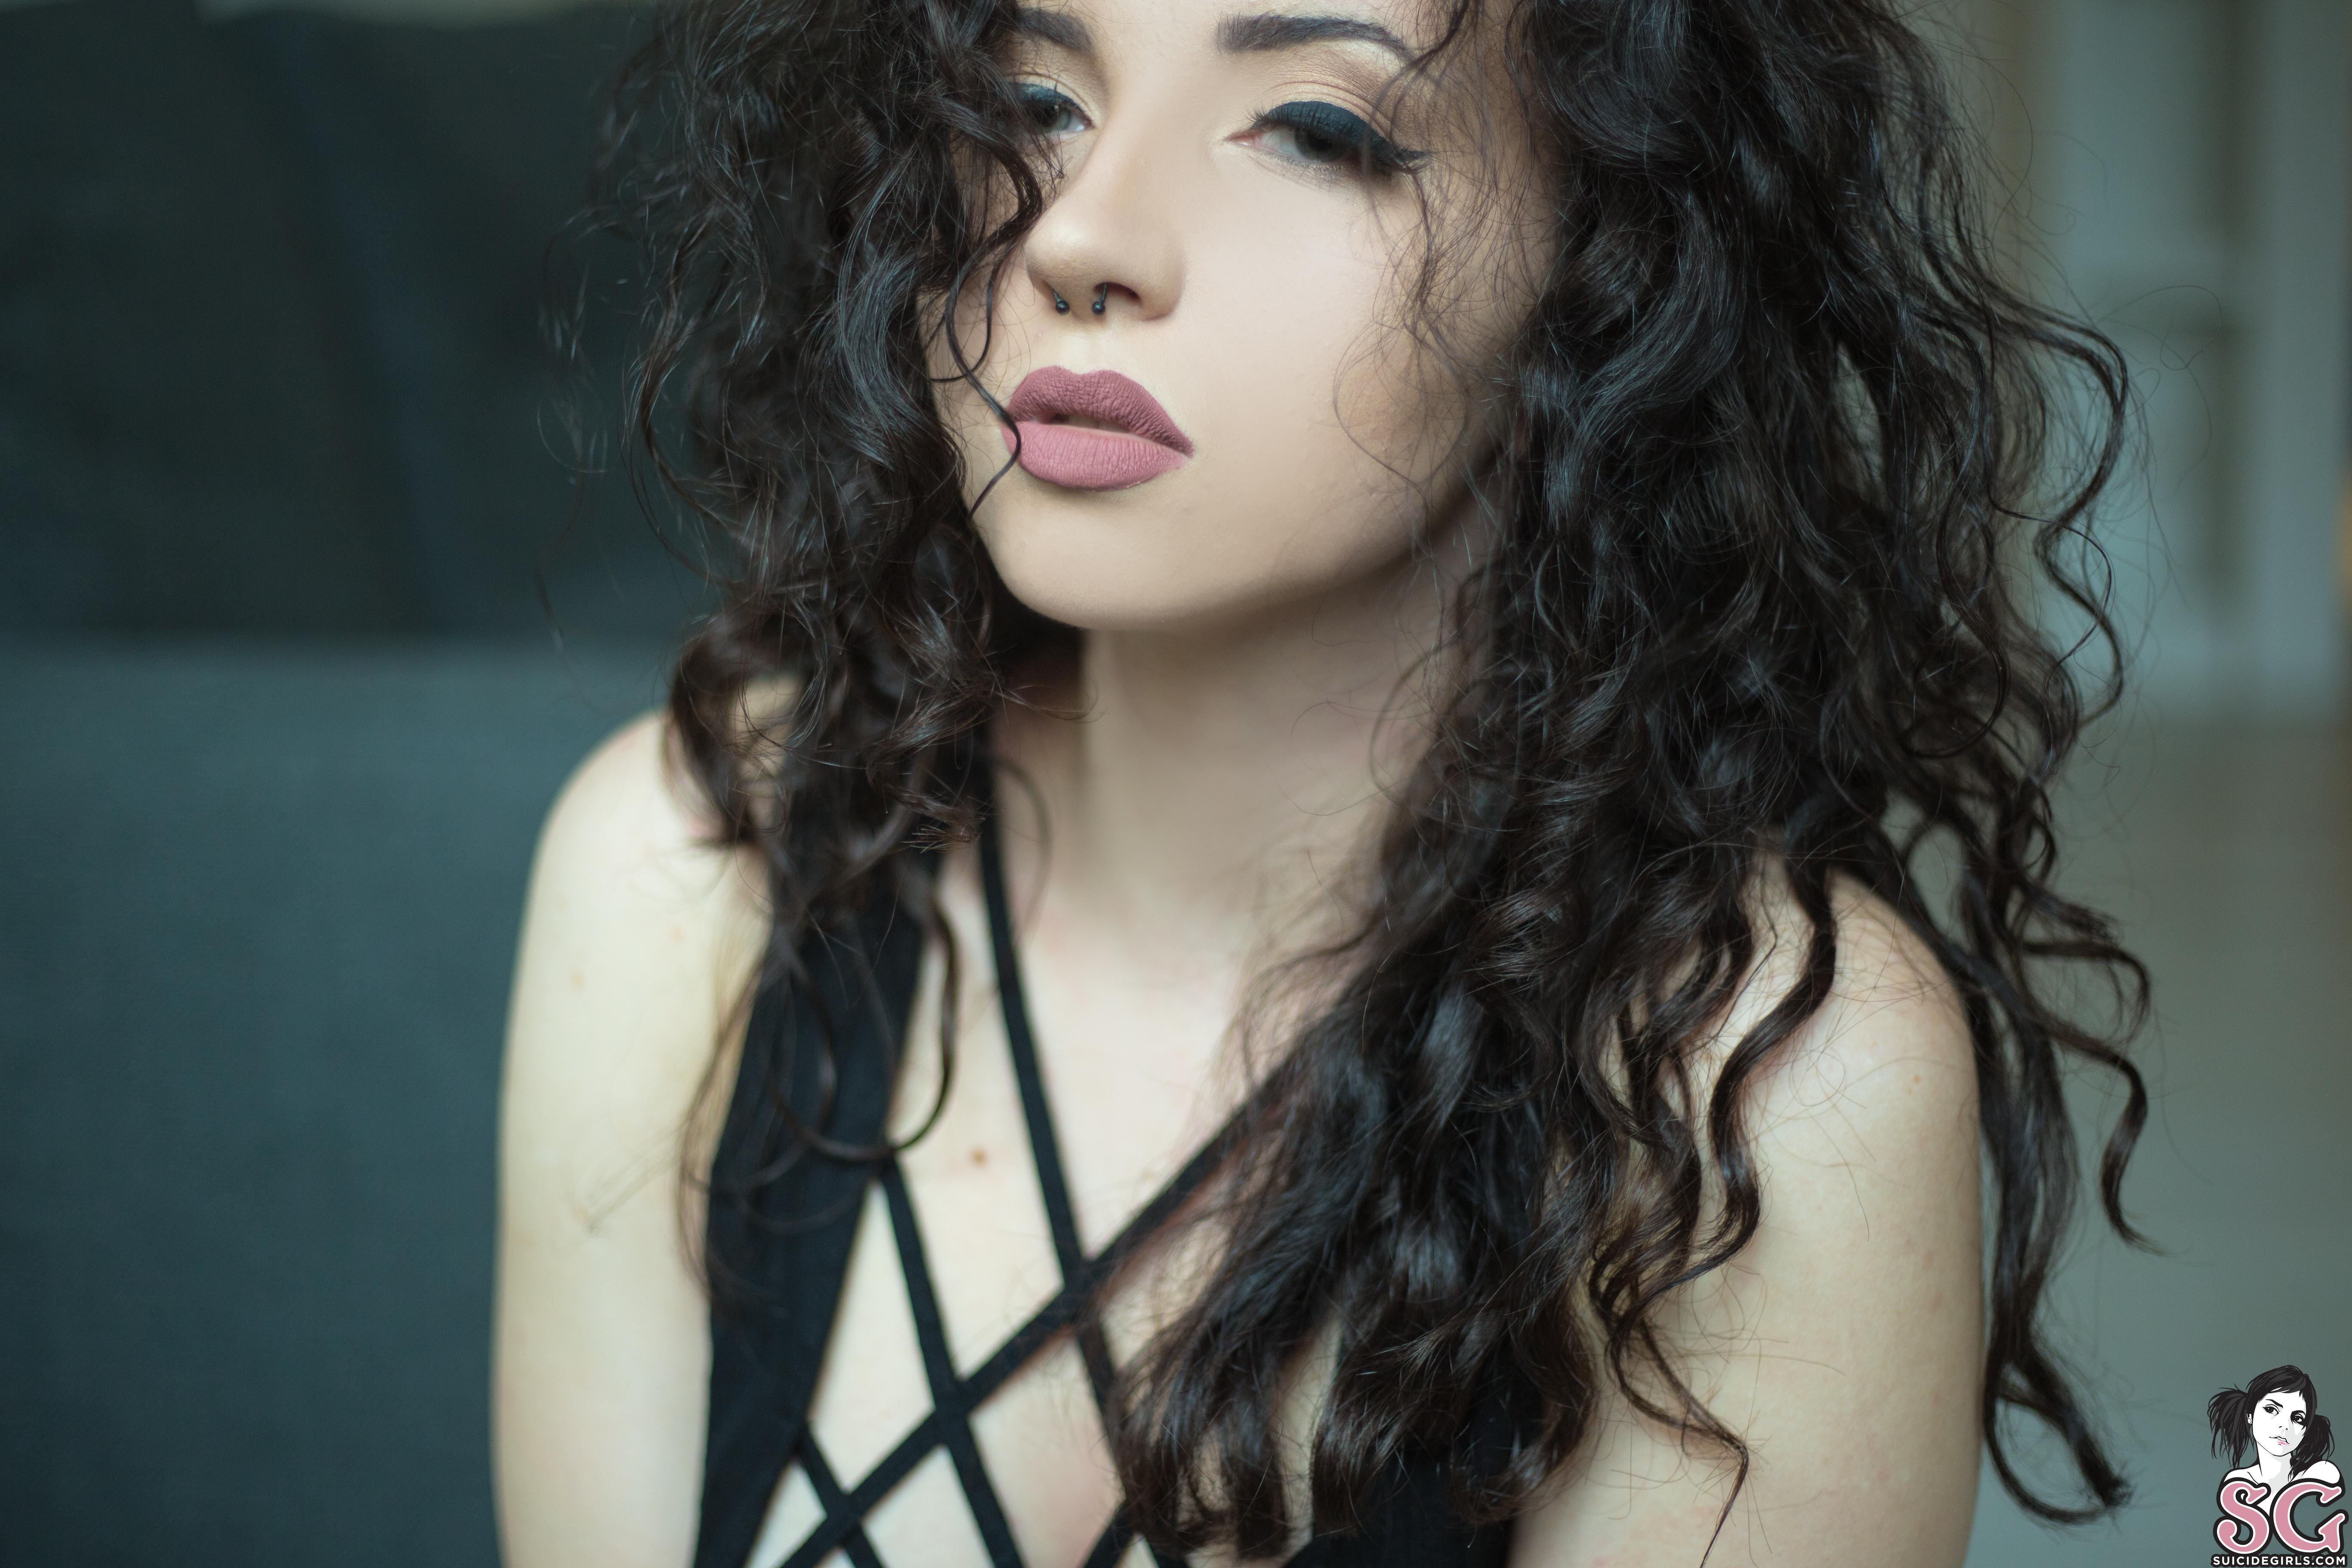 People 5472x3648 Eärendil Suicide Suicide Girls photography model women women indoors curly hair brunette black lingerie face piercing depth of field bare shoulders lace up top watermarked closeup